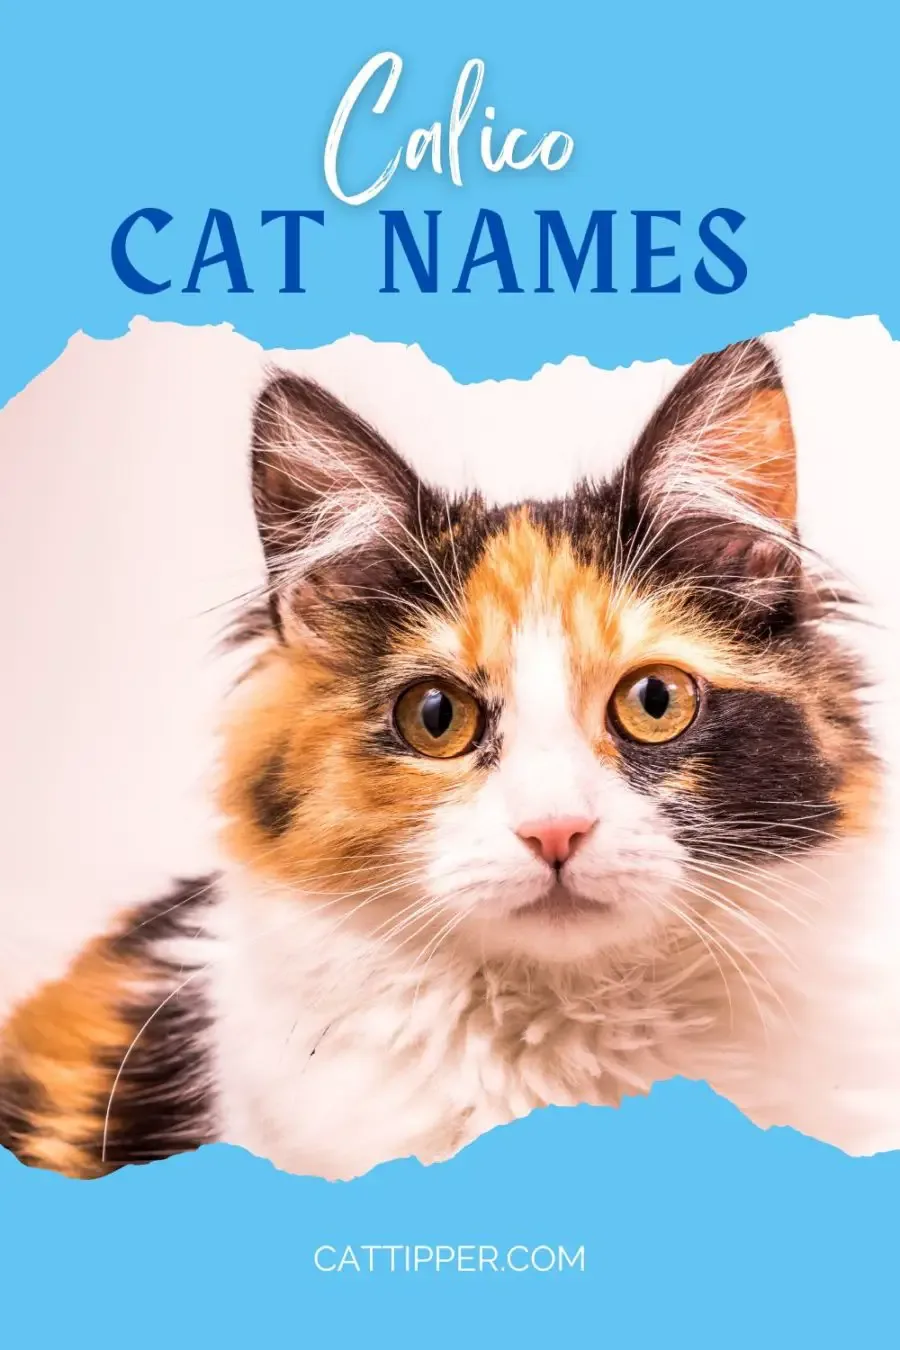 Calico kitten closeup on Pinterest pin featuring Calico cat Names